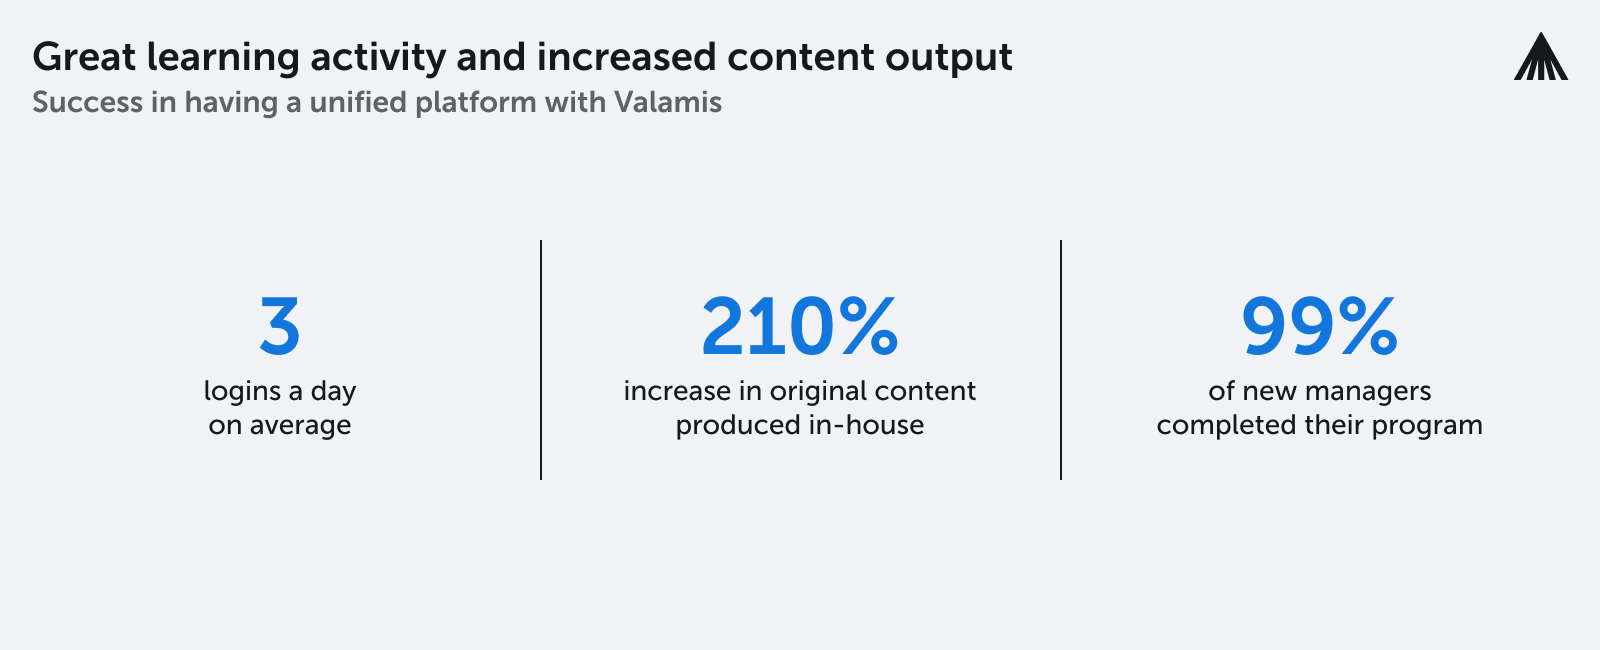 The image represents the results of utilizing Valamis LMS